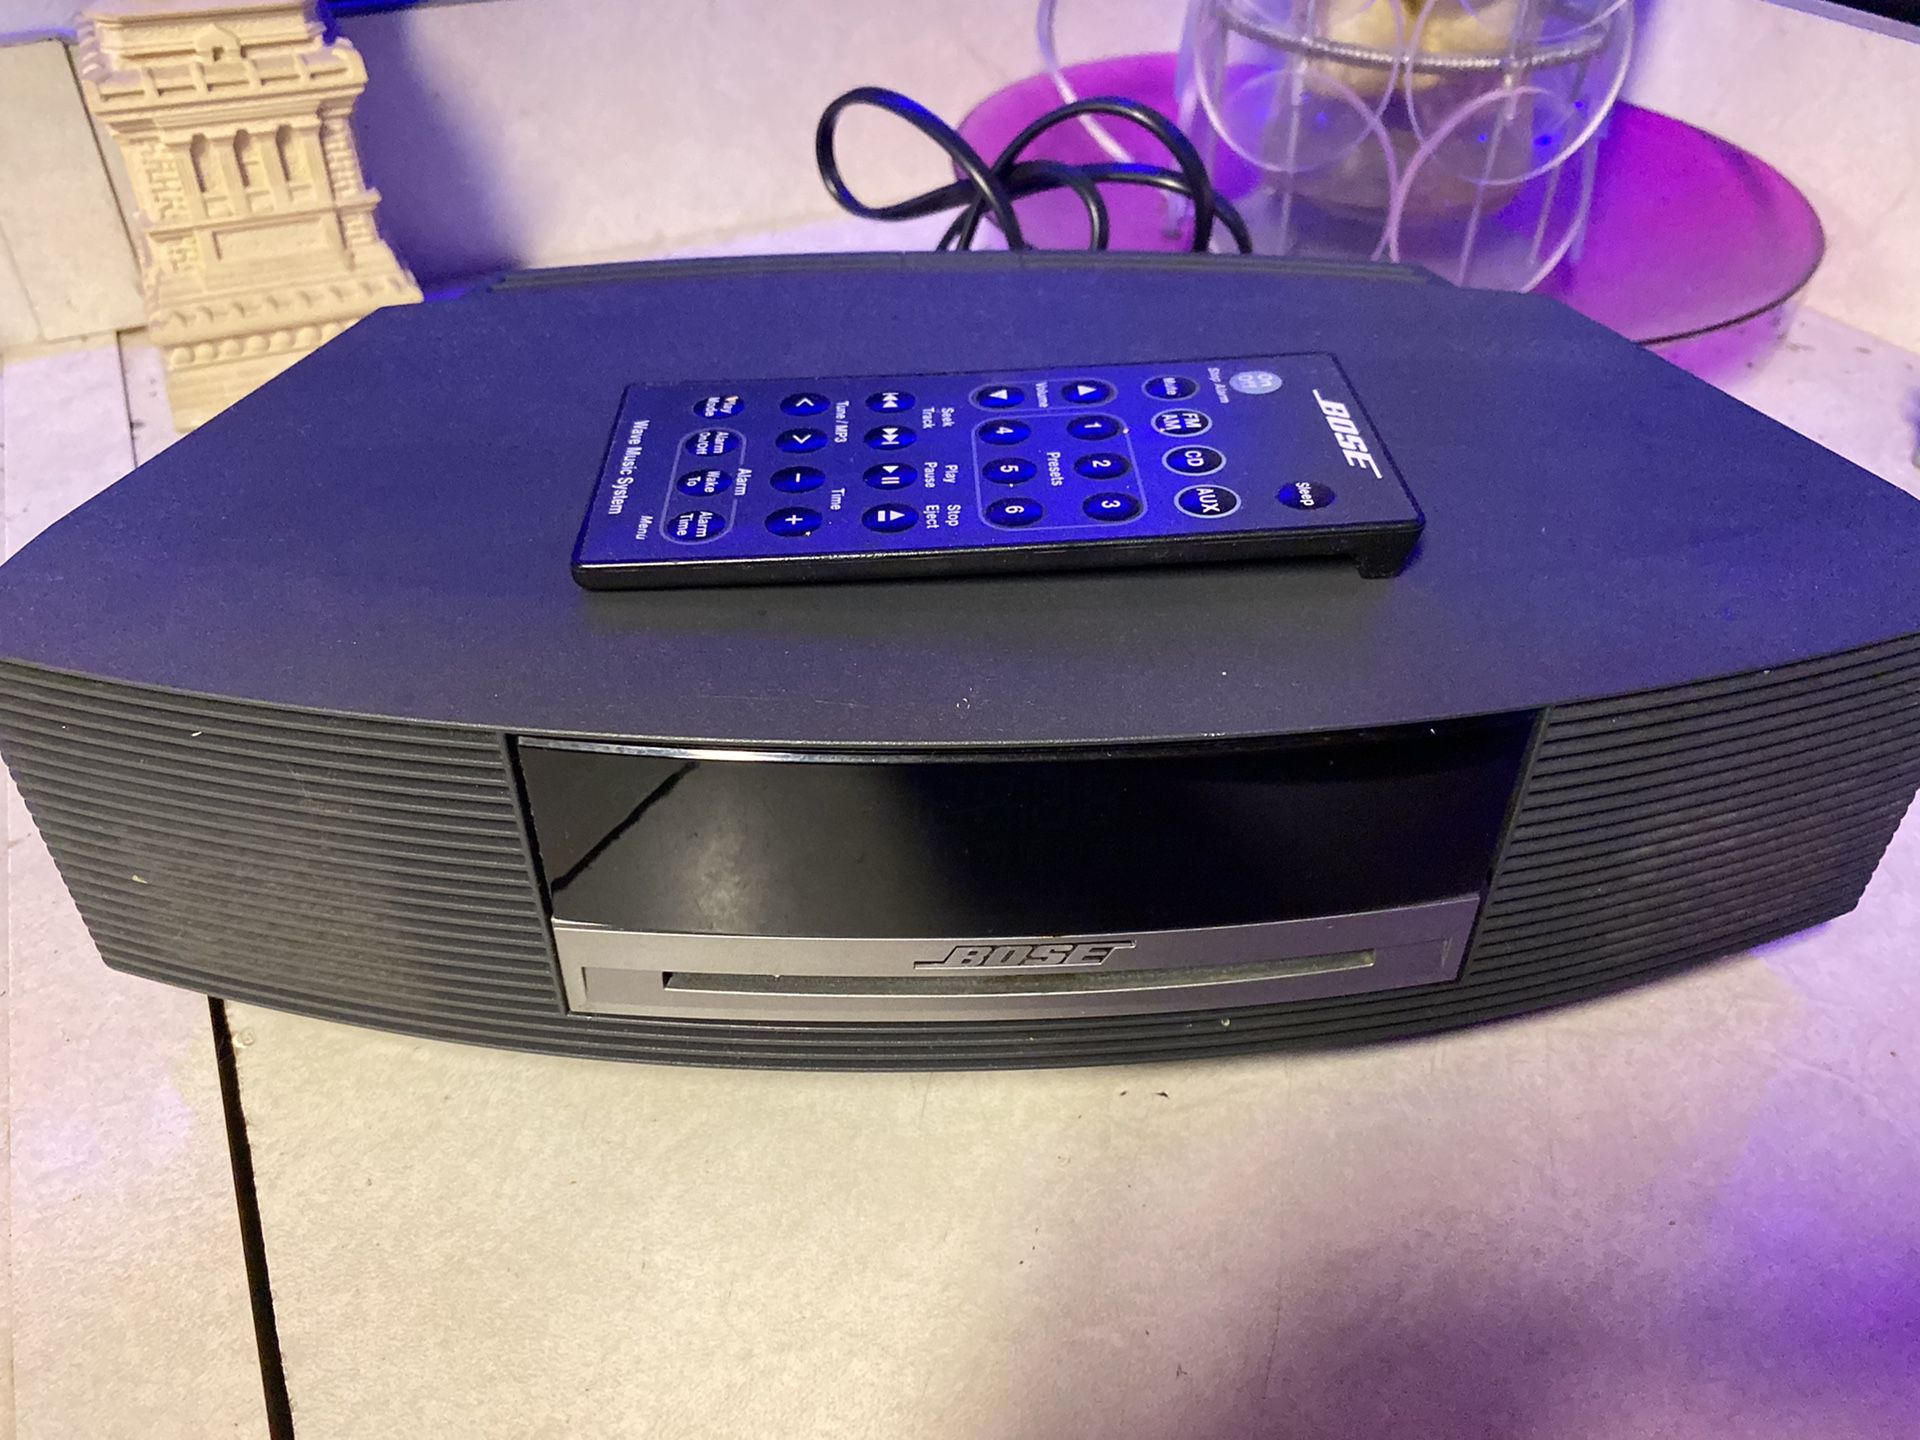 Bose wave radio with remote. Excellent condition